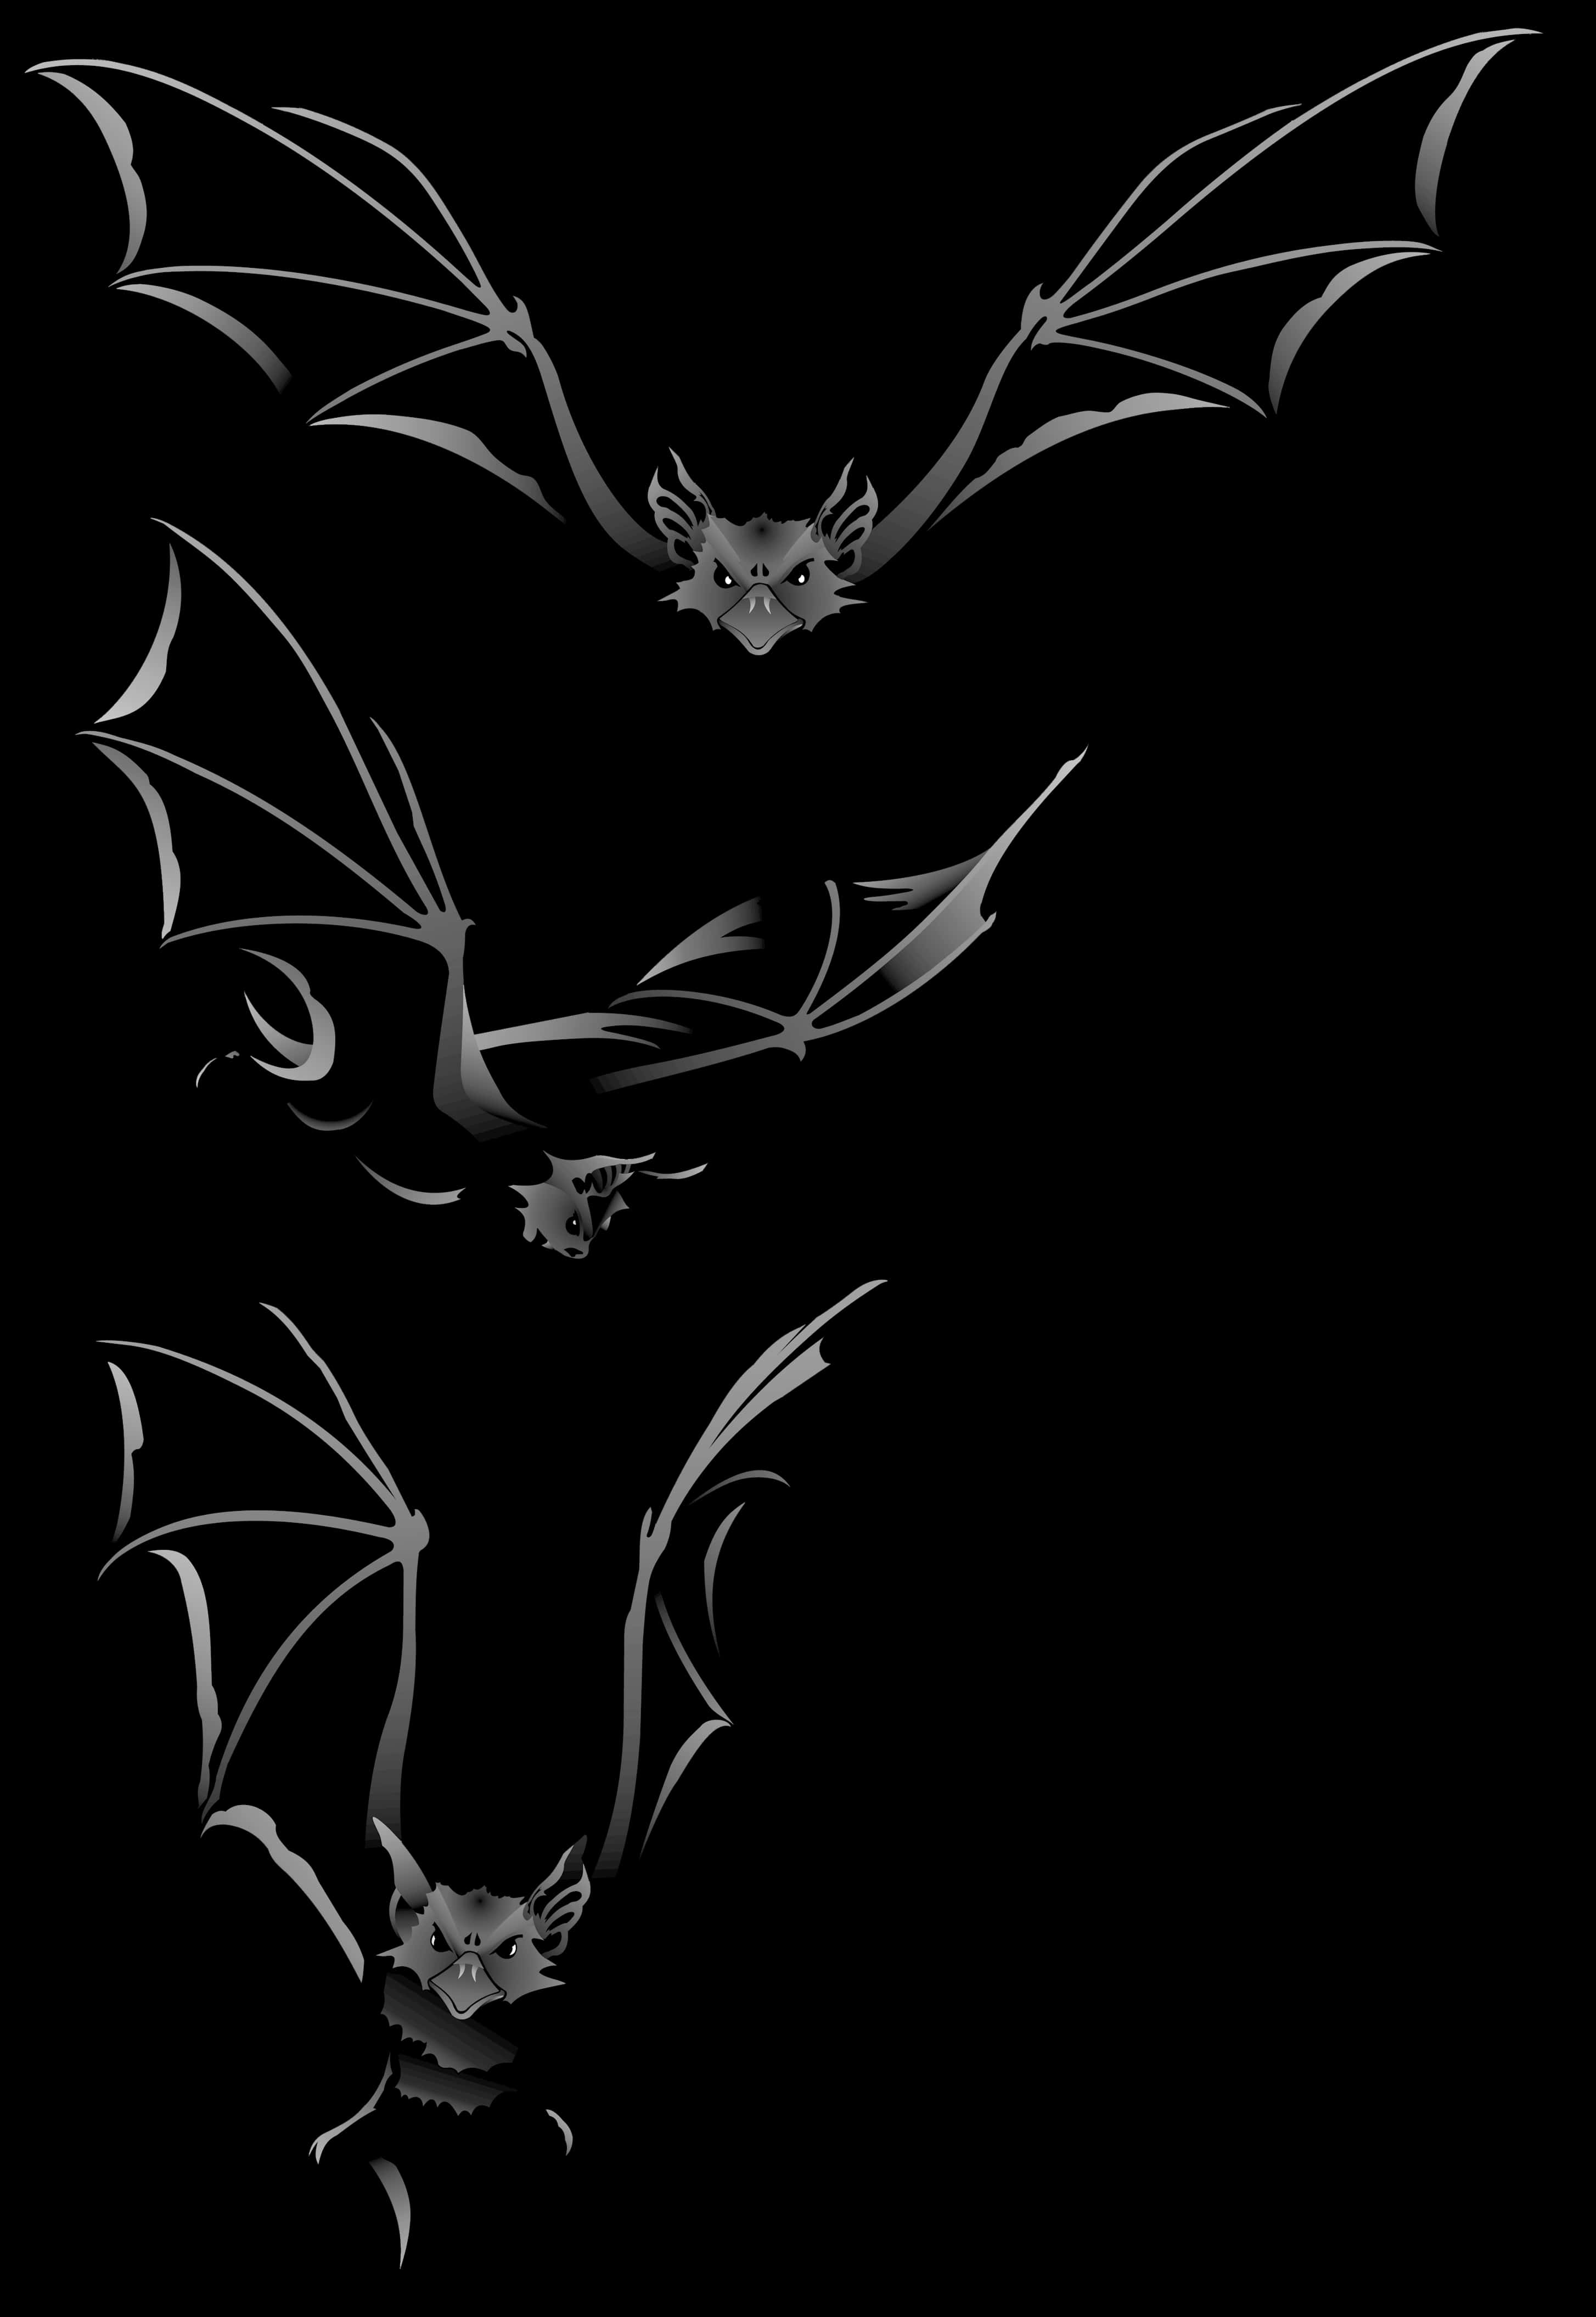 A Group Of Bats With Wings